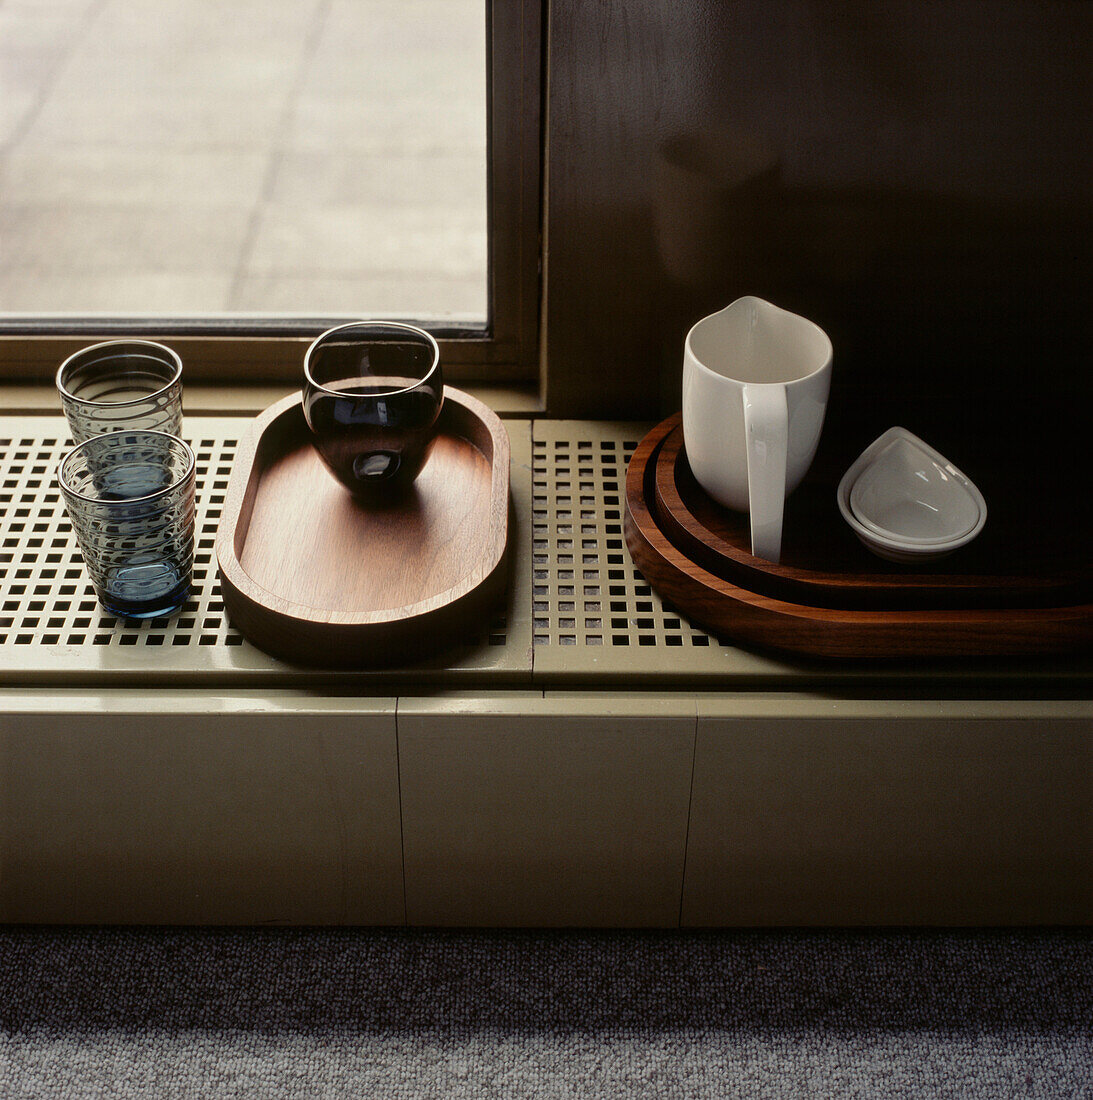 Display of contemporary homeware on wooden trays on a ventilated window sill